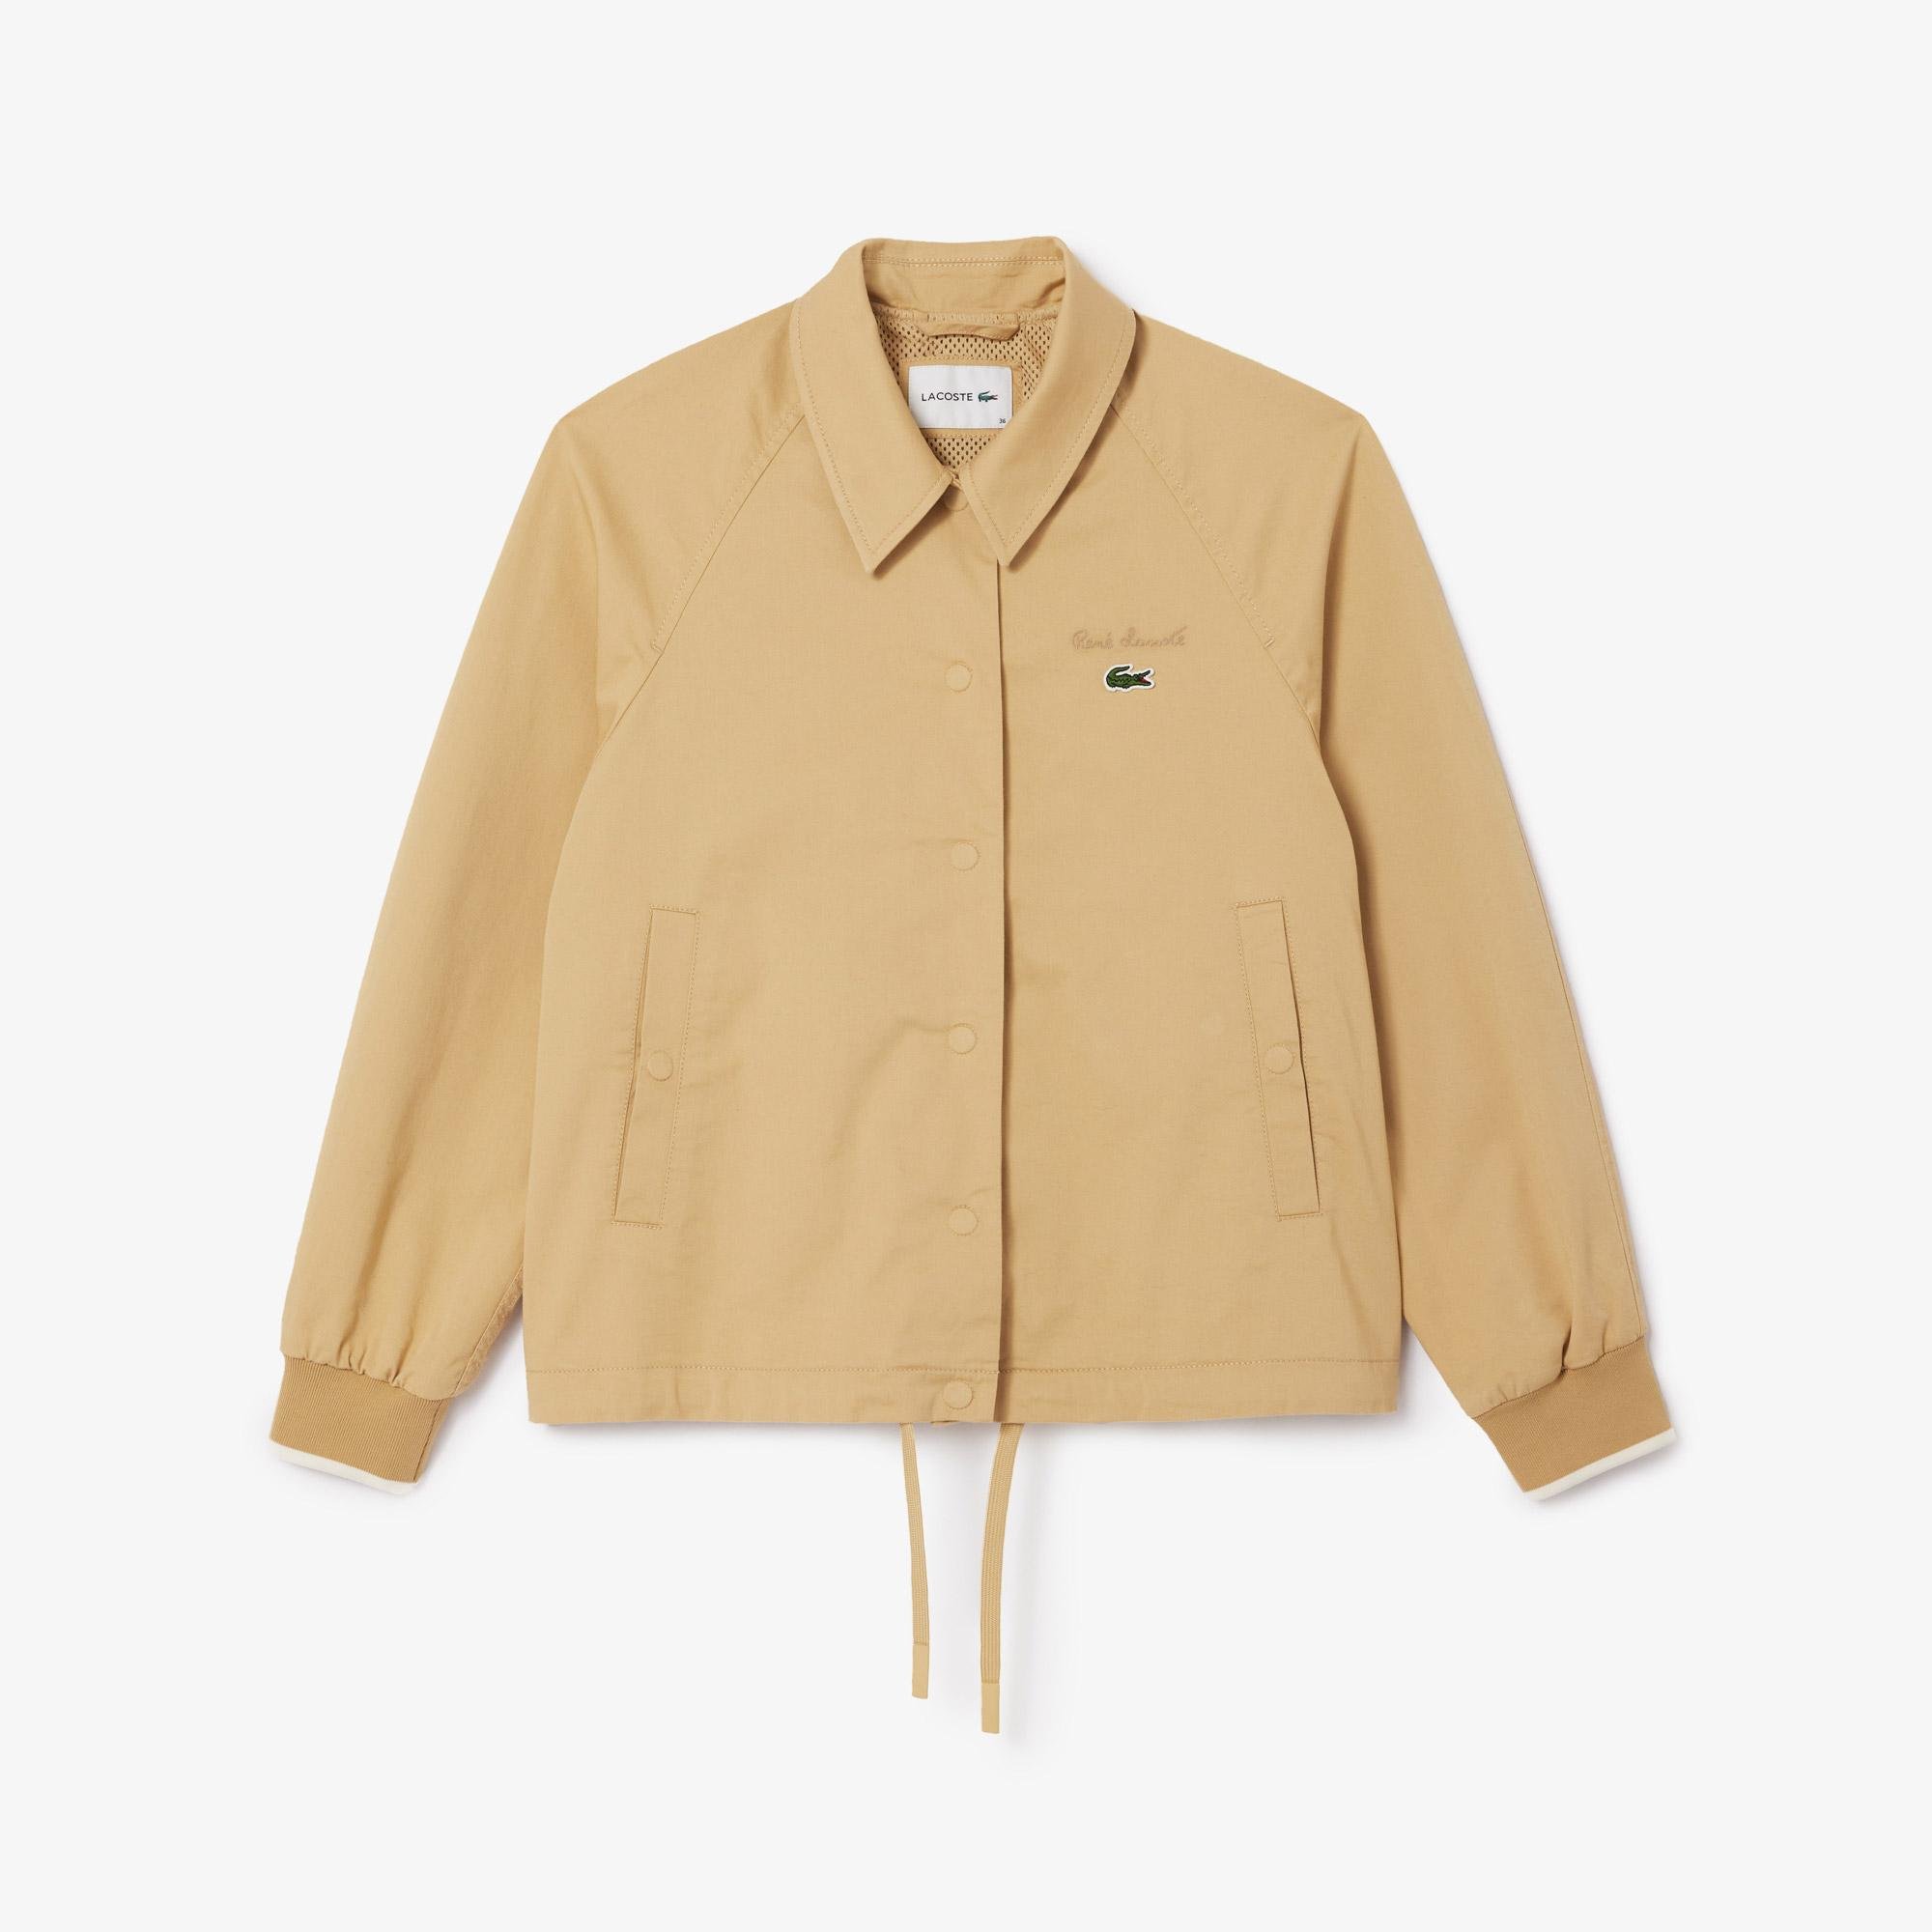 Lacoste Women's Oversized Embroidered Jacket